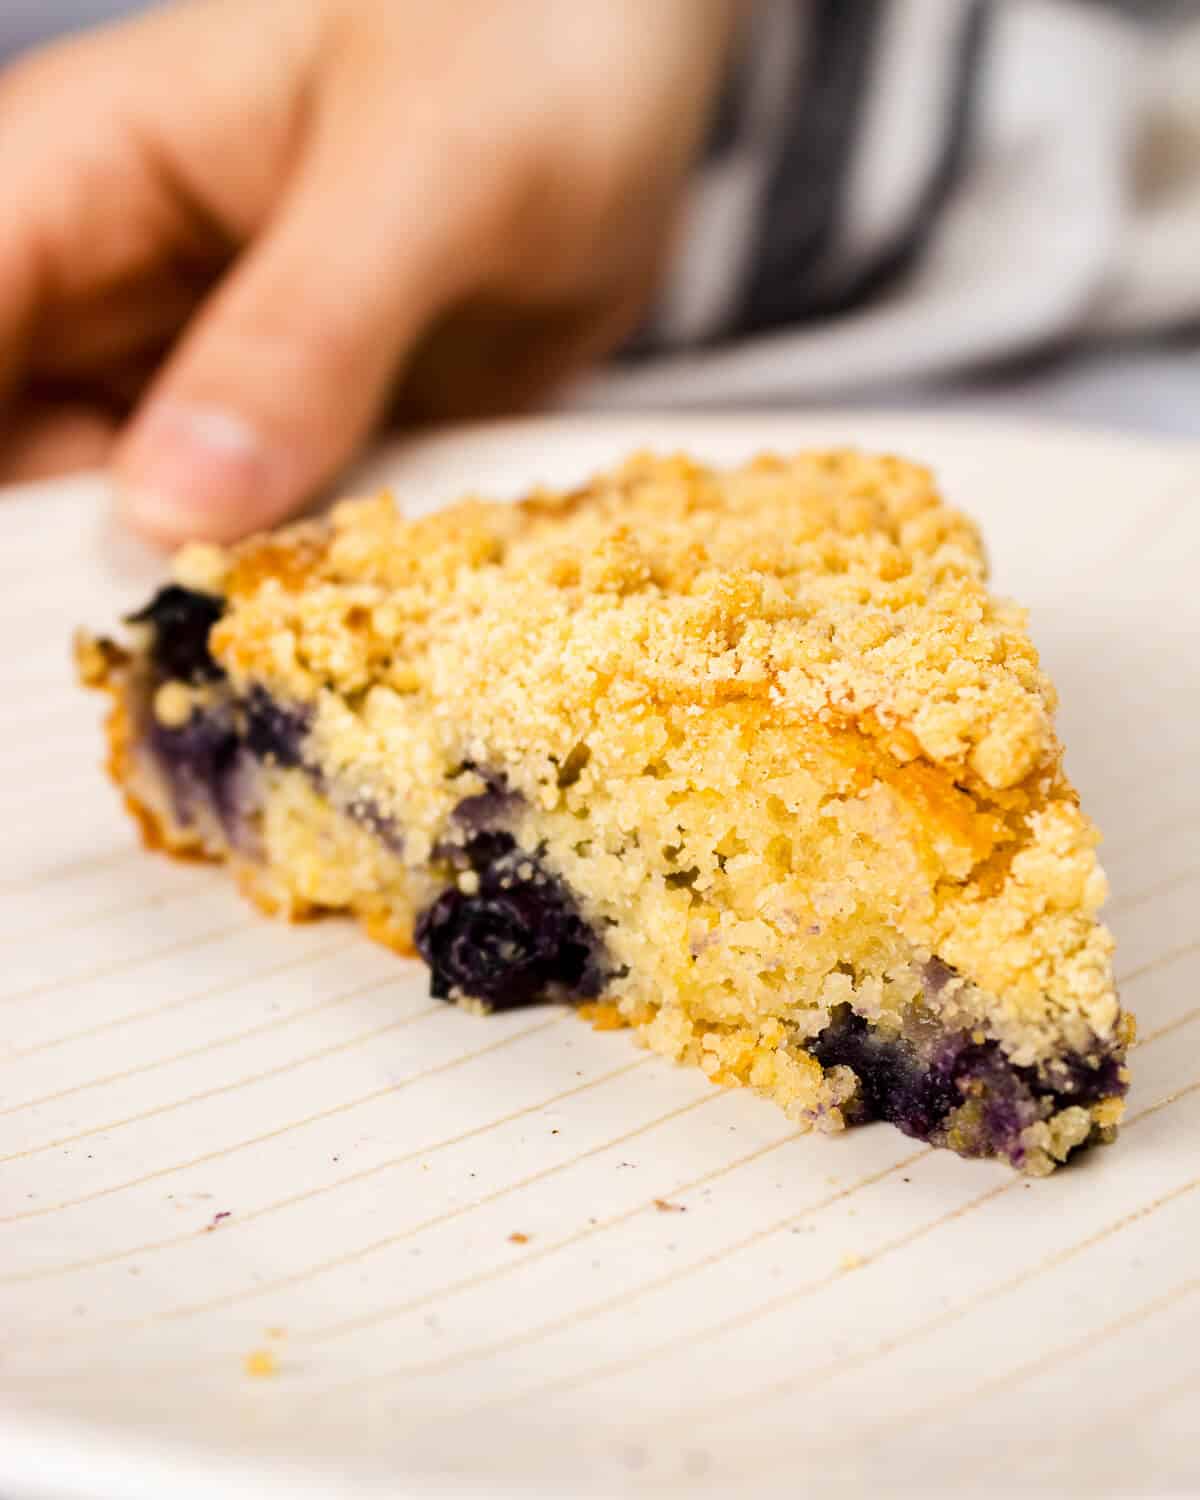 A slice of blueberry crumble cake of a white plate, a hand is holding the plate.